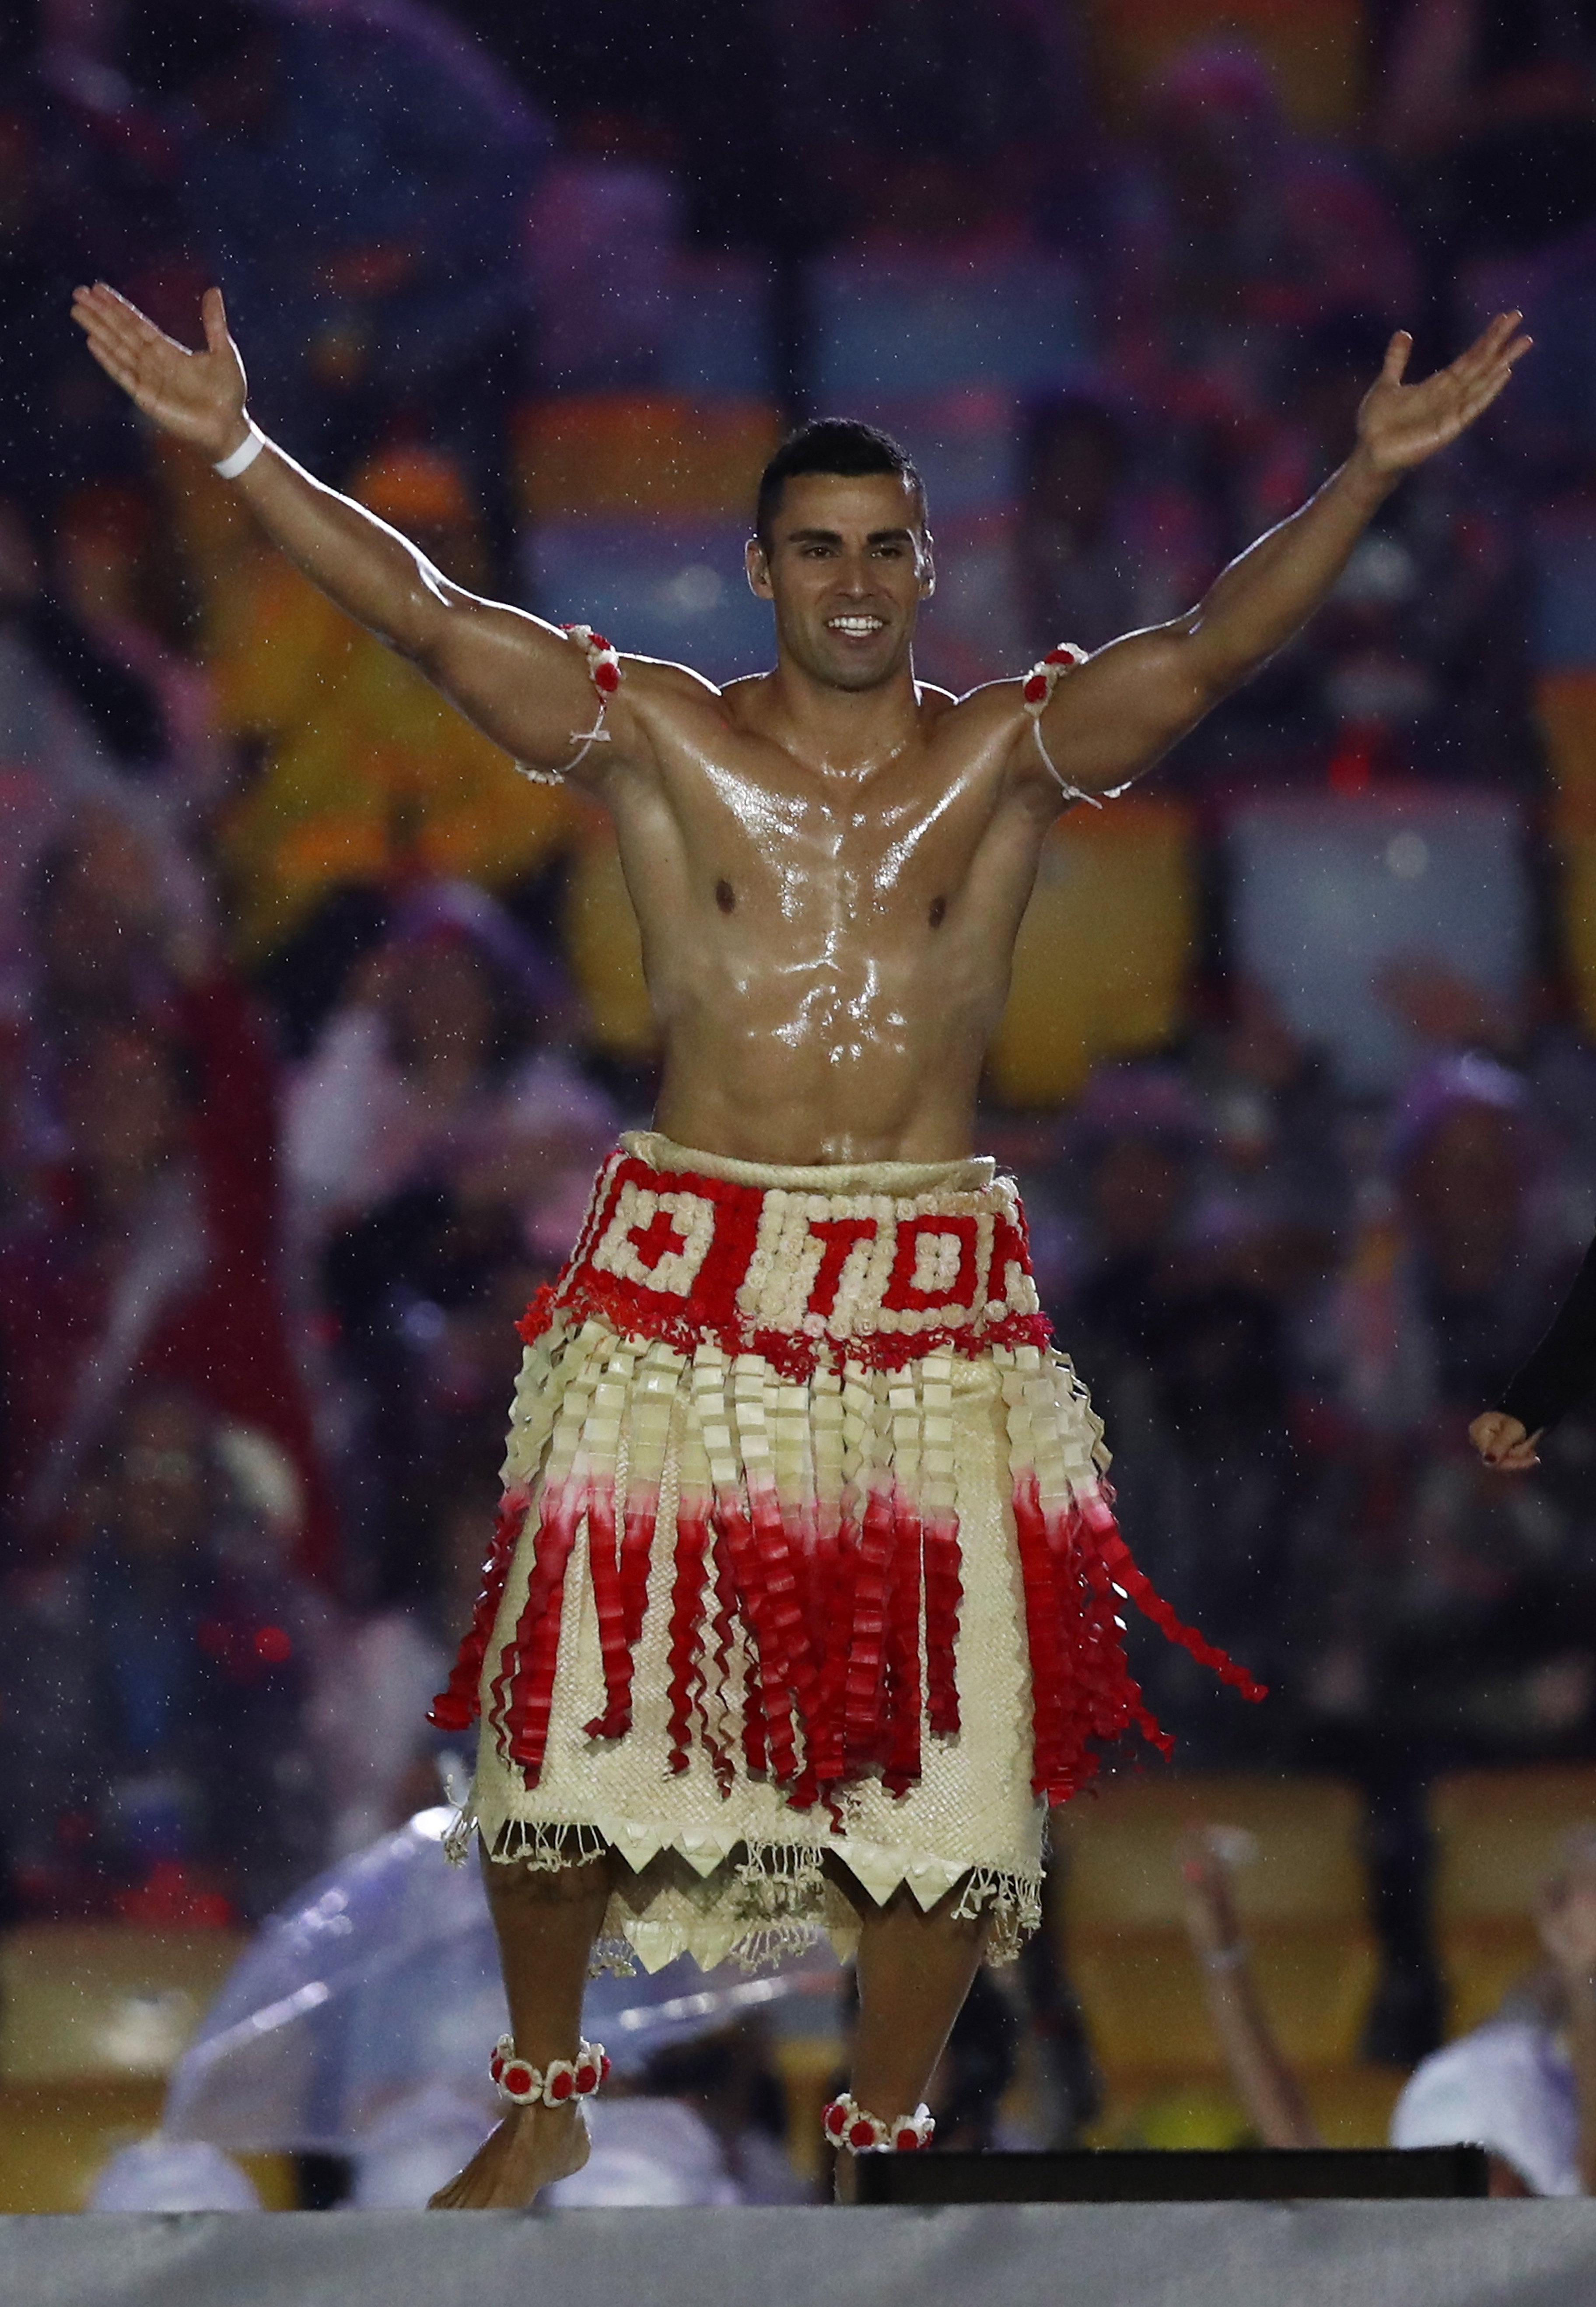 Tonga Flag Bearer Memes Jokes From The Olympic Closing Ceremony Show This Guy Is Still A Crowd Pleaser